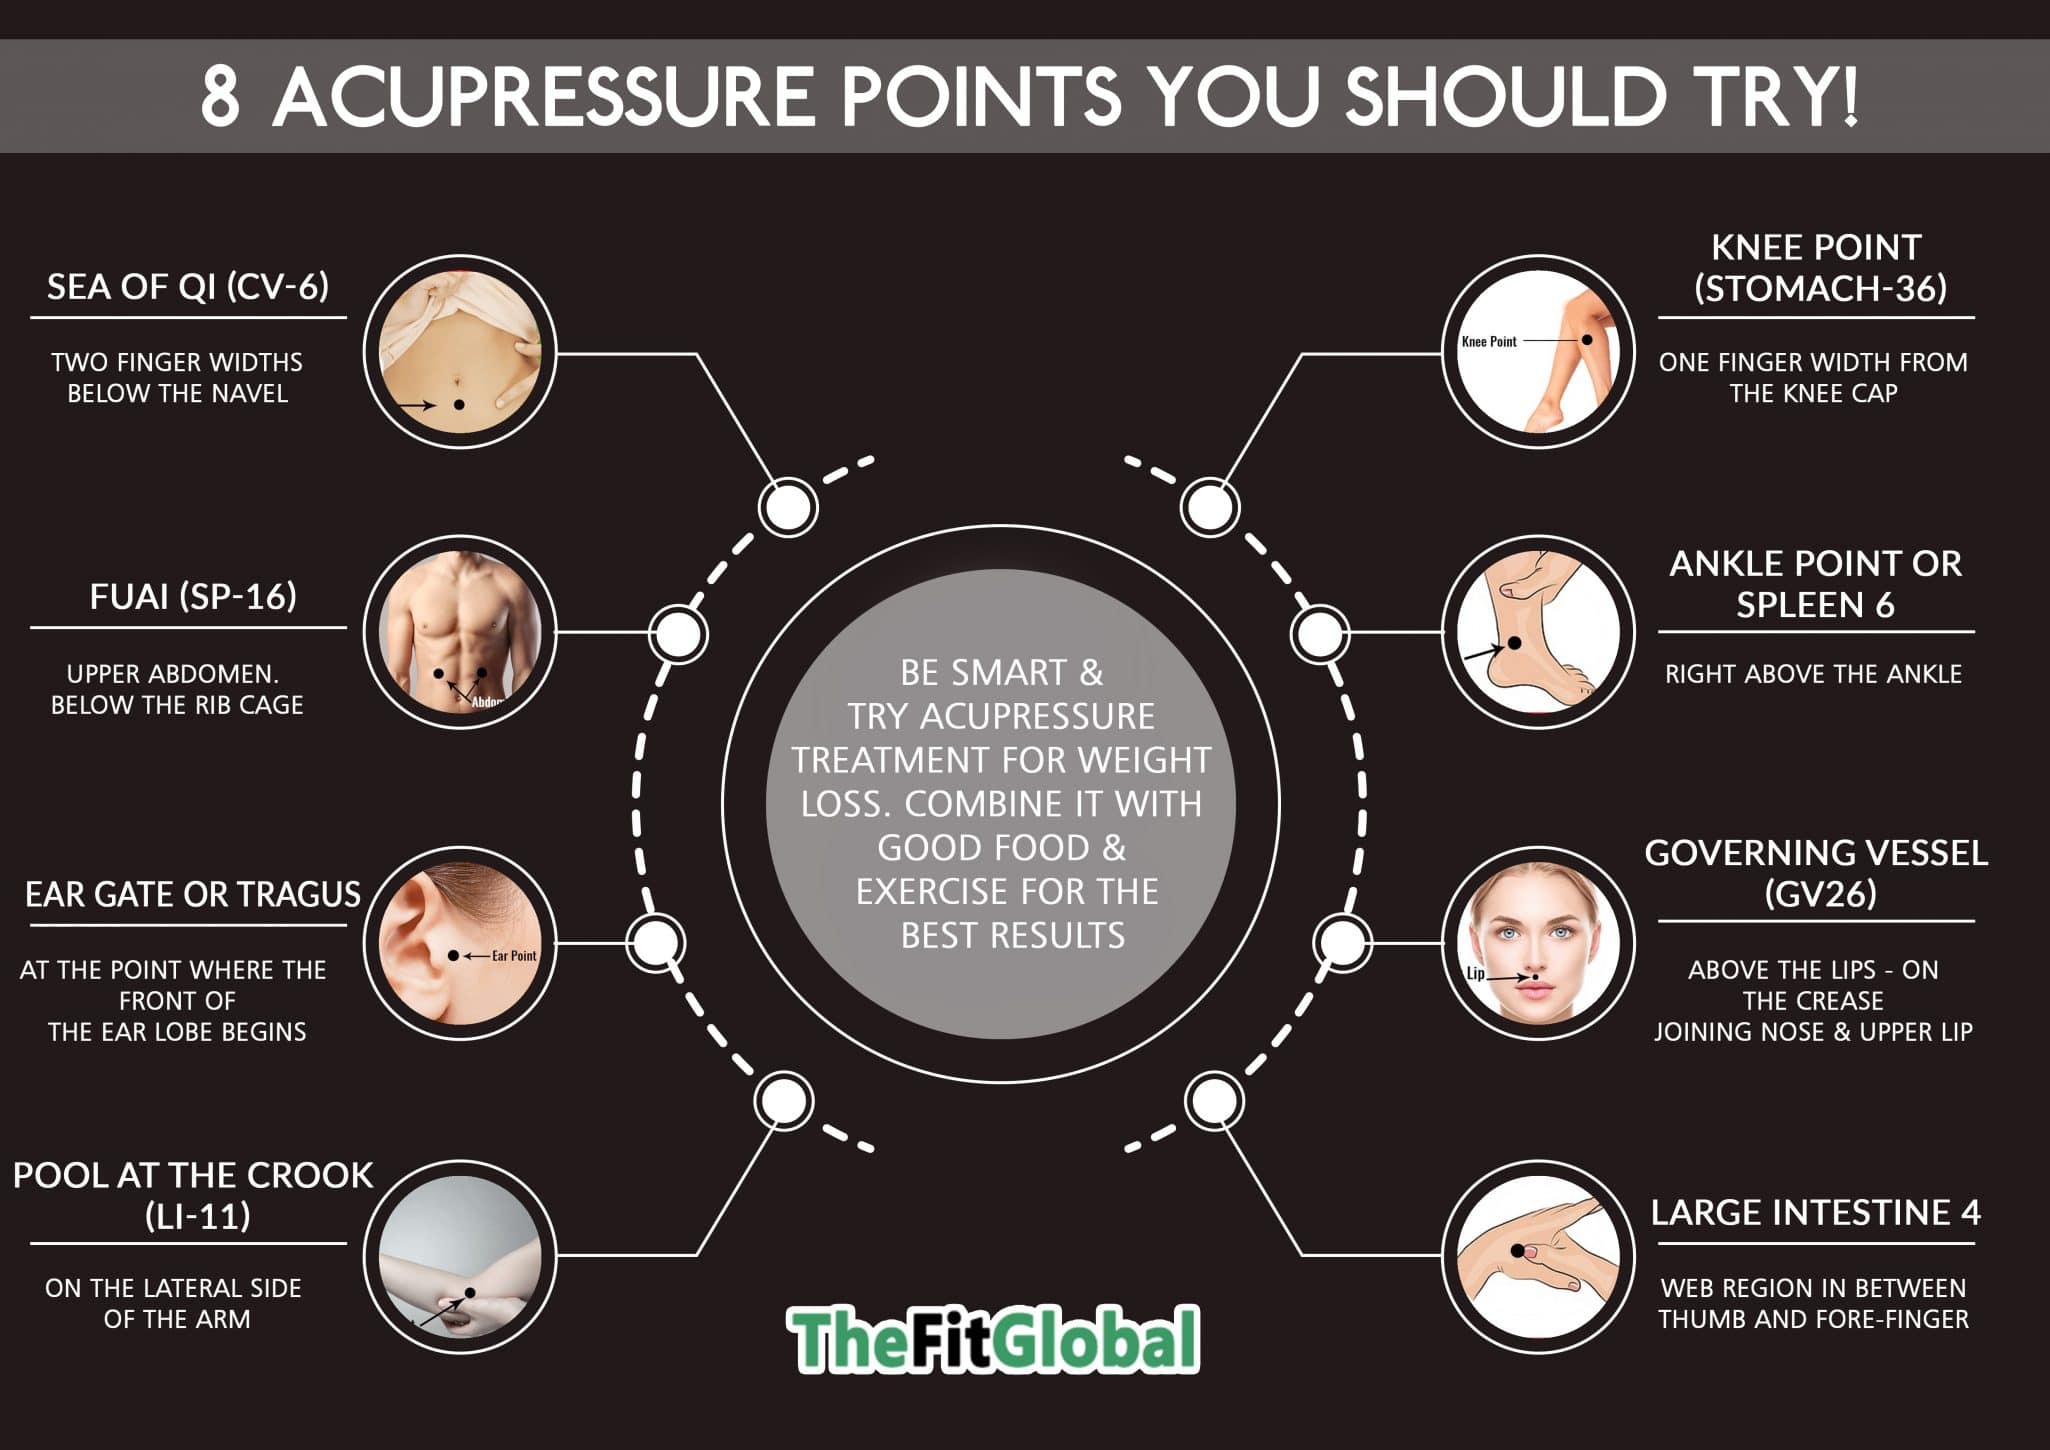 Acupressure treatment for weight loss